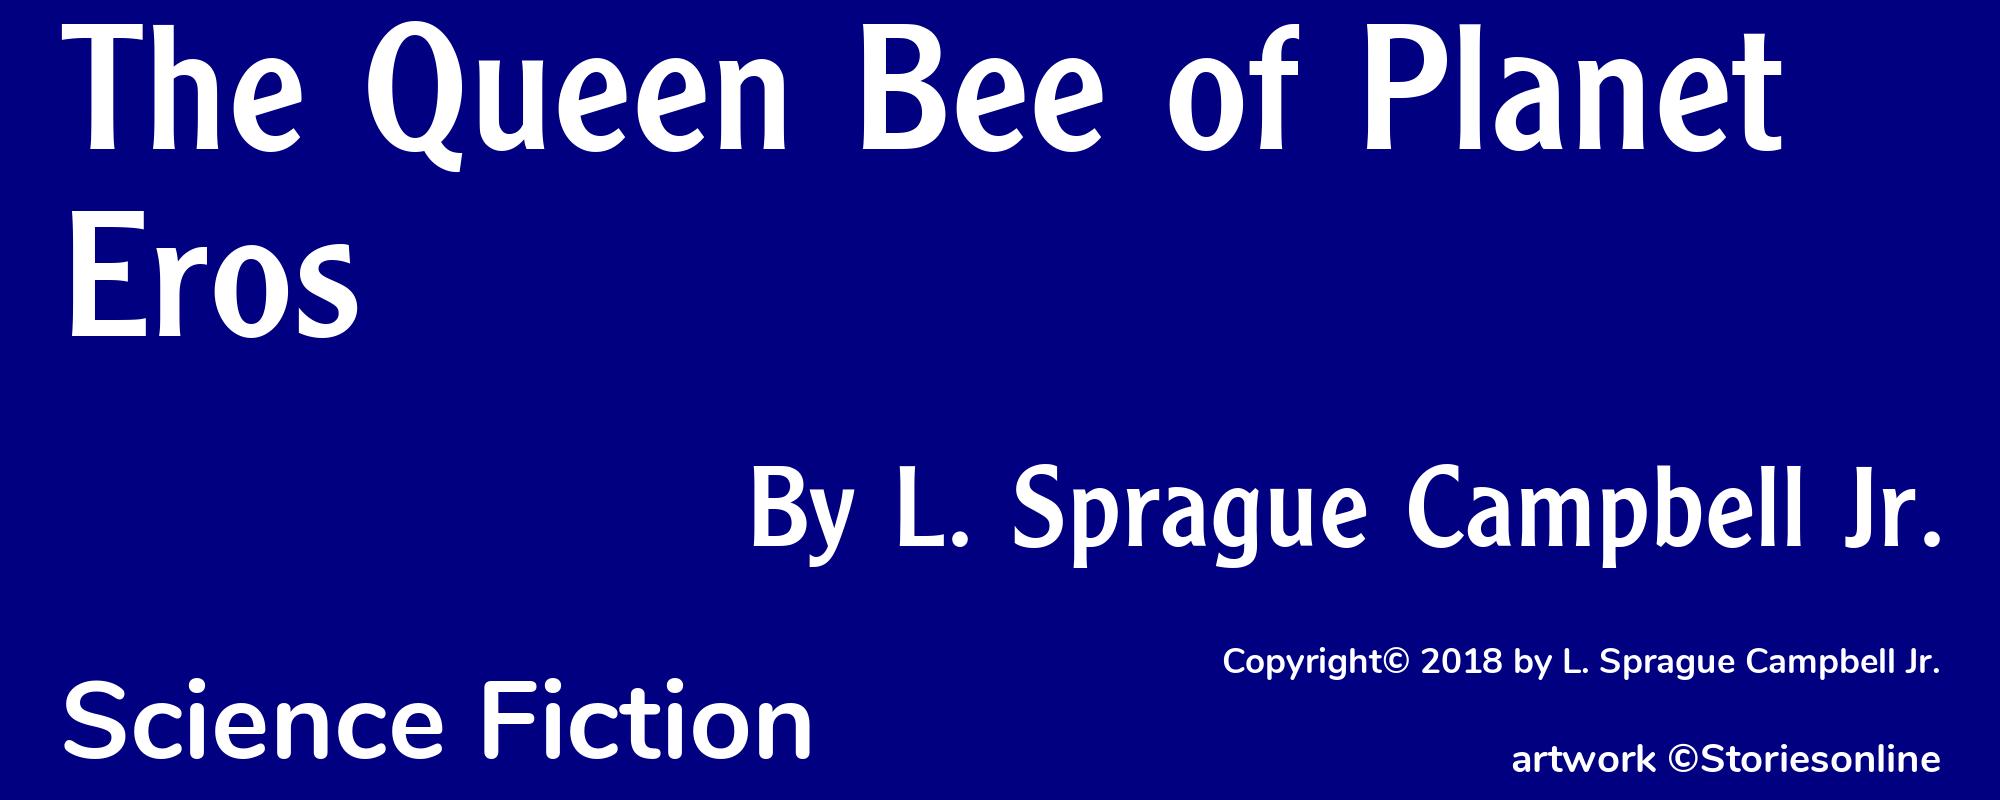 The Queen Bee of Planet Eros - Cover